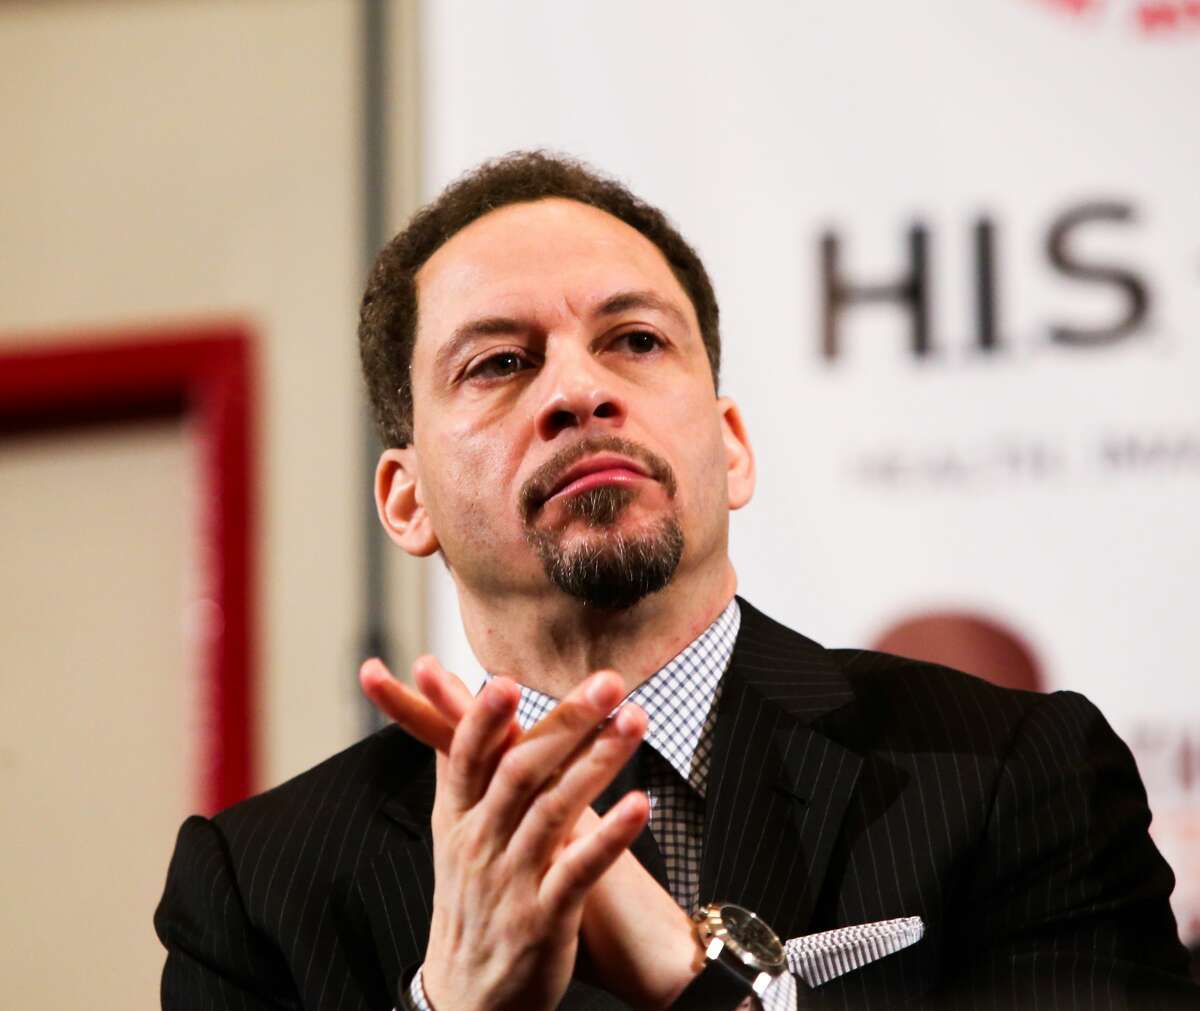 Chris Broussard attends NBAPA All-Star Youth Summit: Real Talk on February 13, 2015 in New York City.